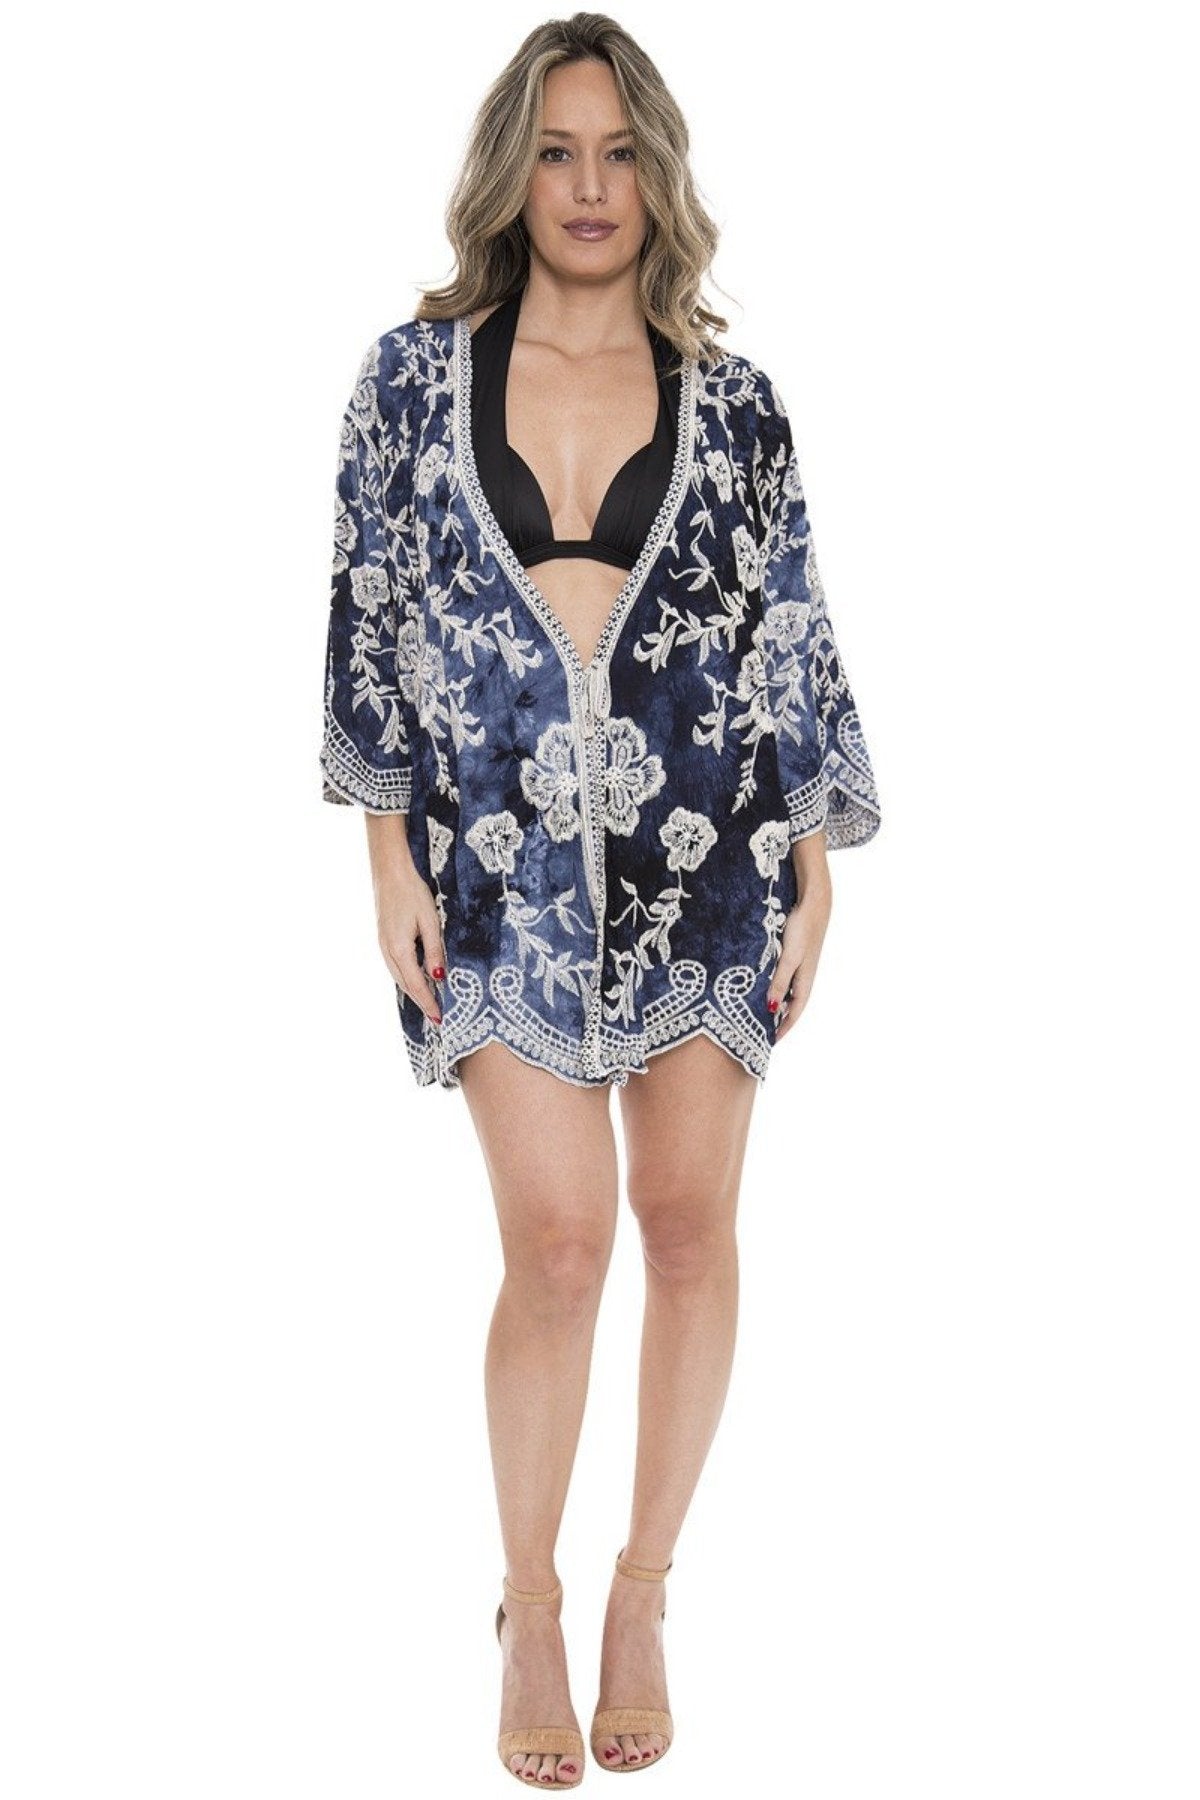 Floral Pattern Short Cover-Up W/ Tie-Knot Closure